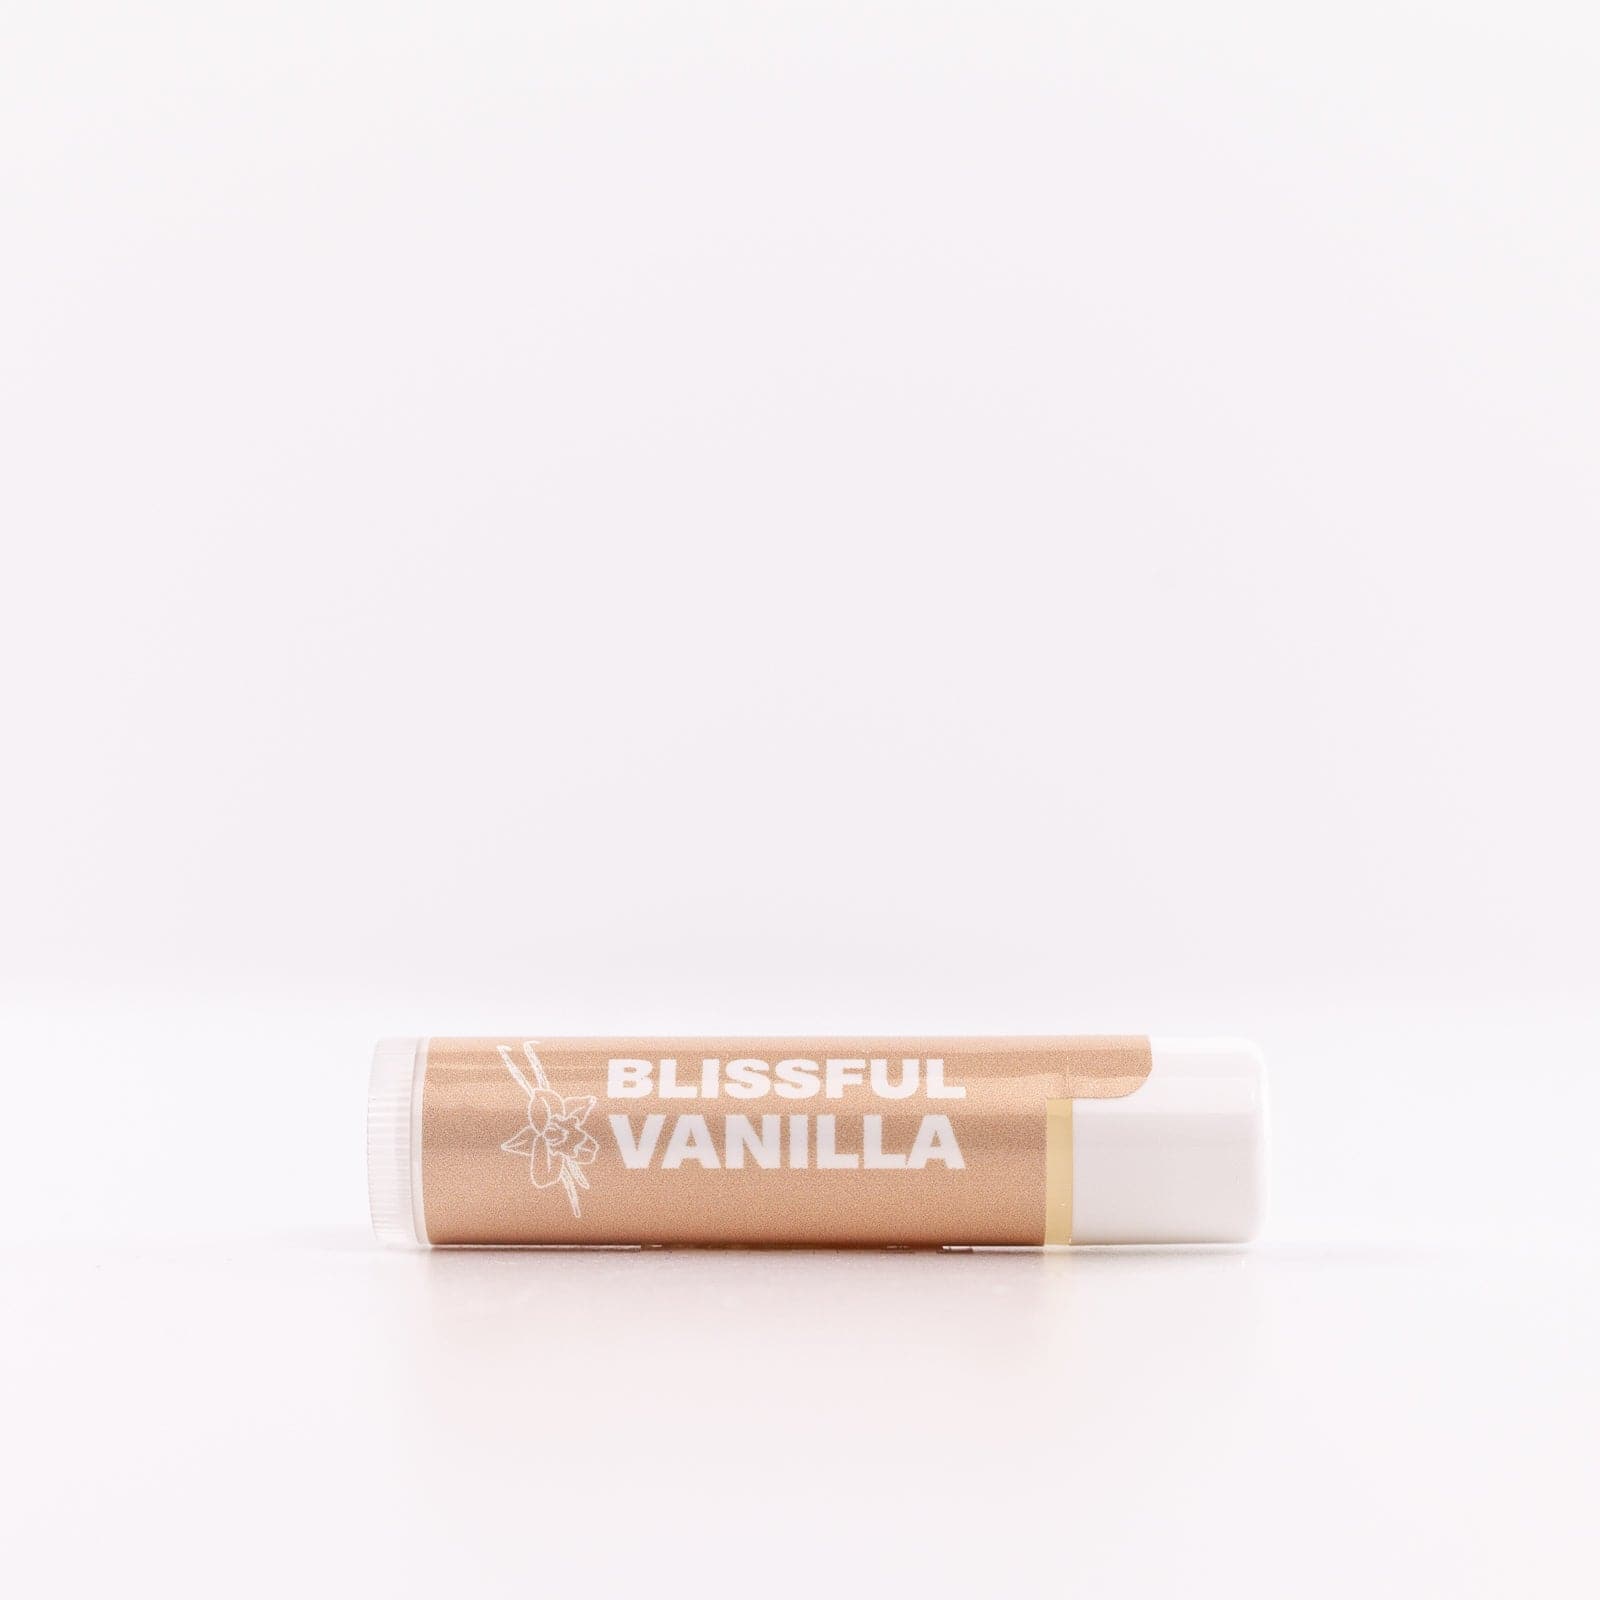 Blissful Vanilla Lip Balm with bronze and white tube against white background